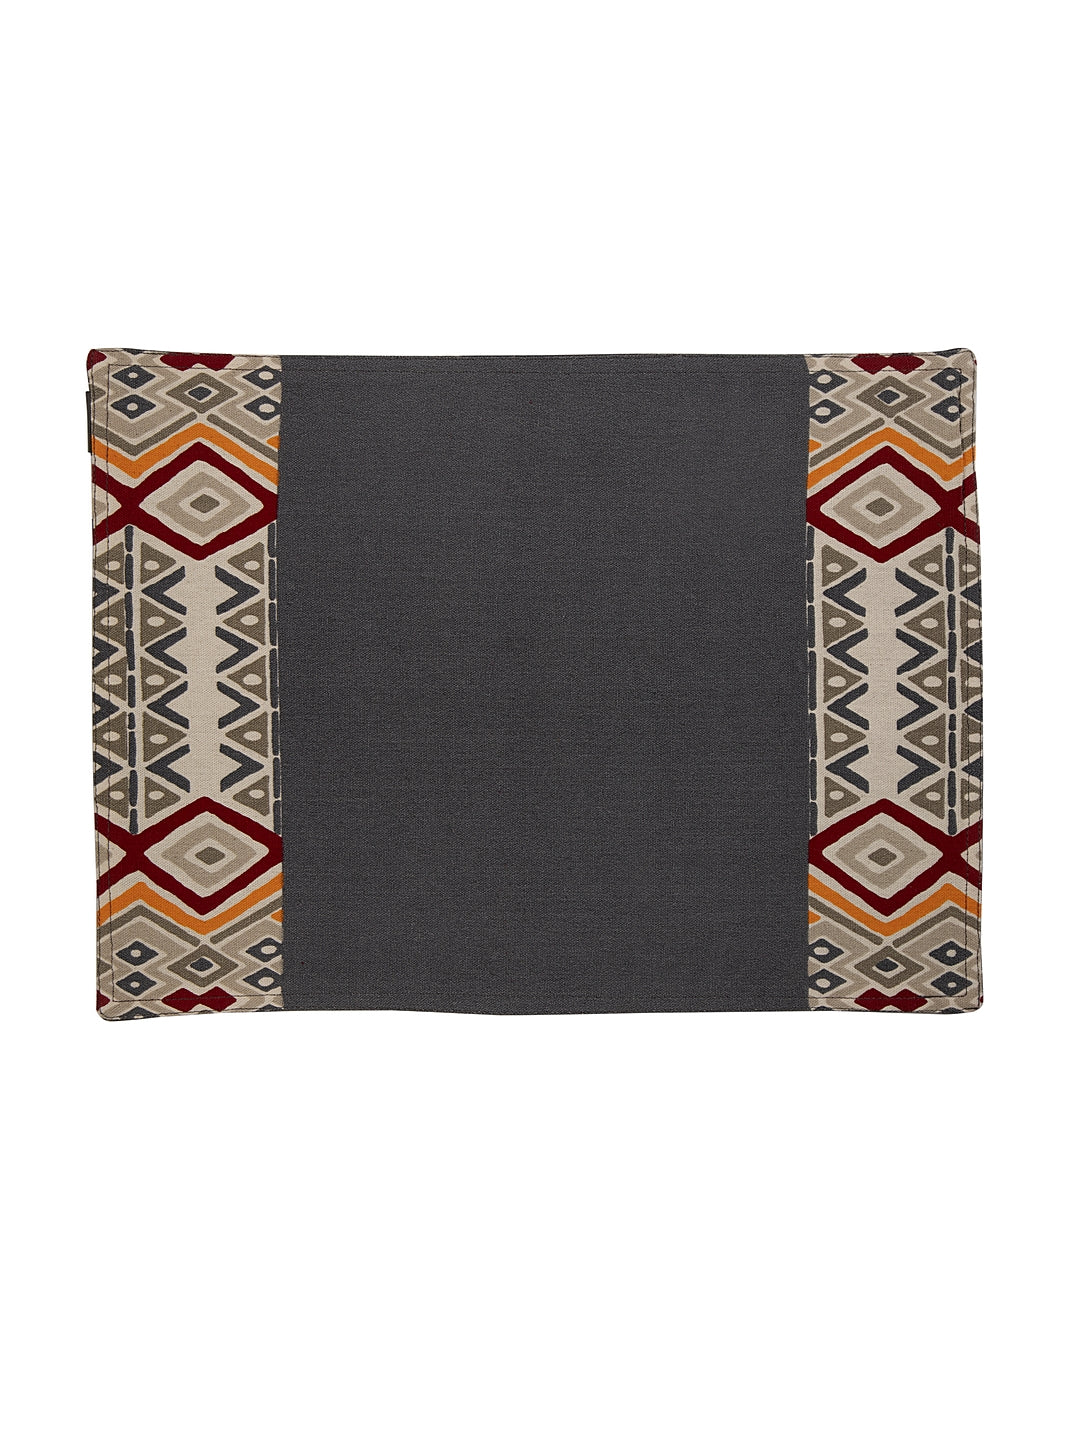 Blanc9 Set of 8 Native Weave Printed Placemats